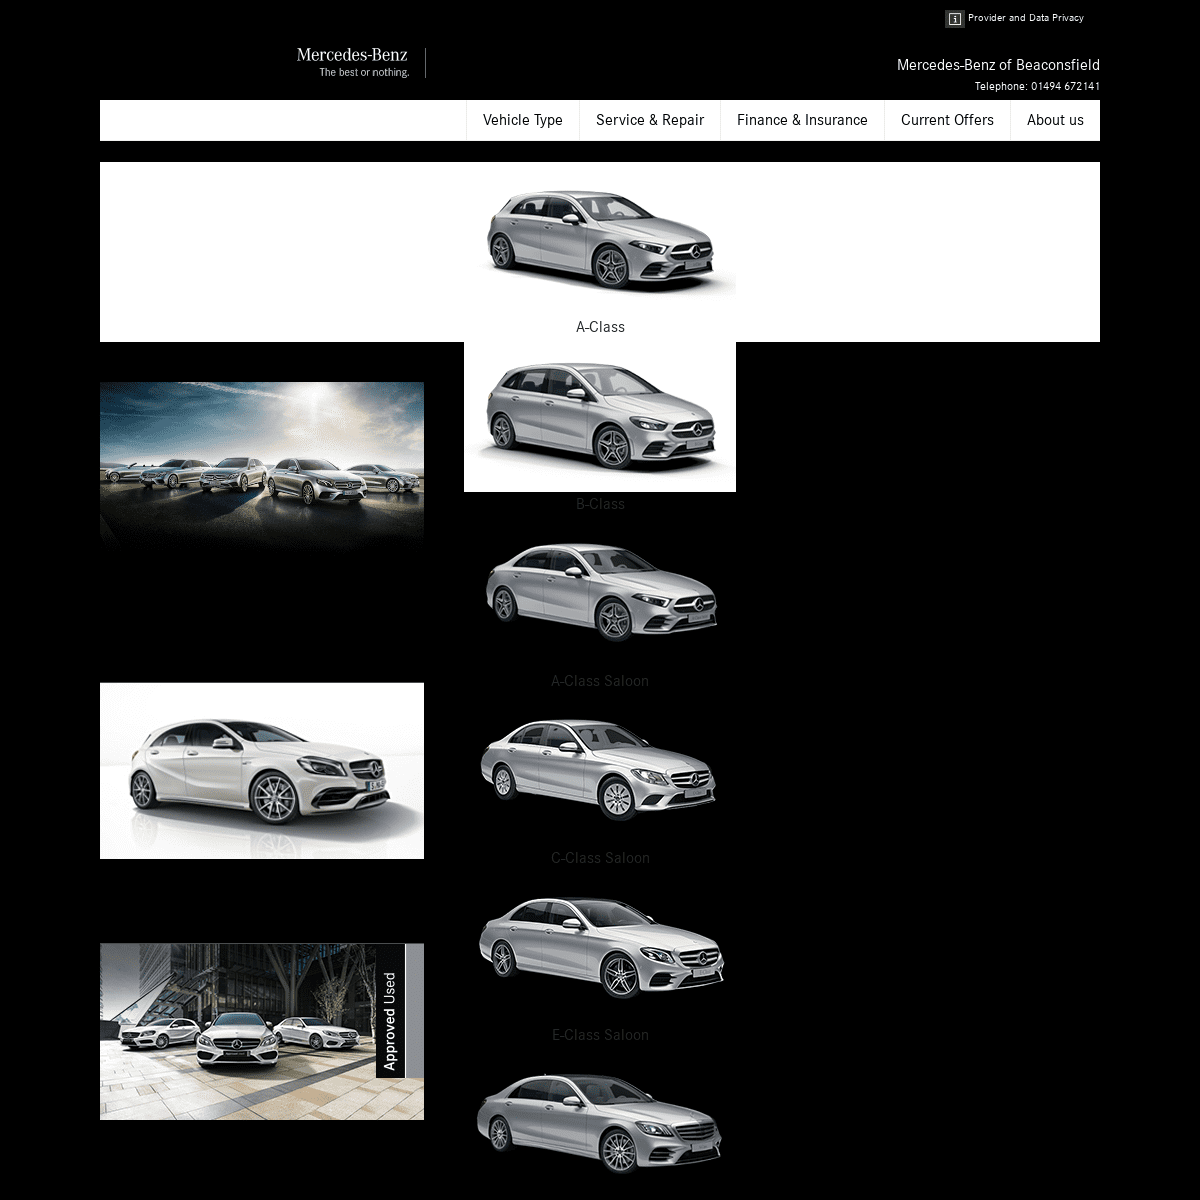 A complete backup of mercedes-benzofbeaconsfield.co.uk